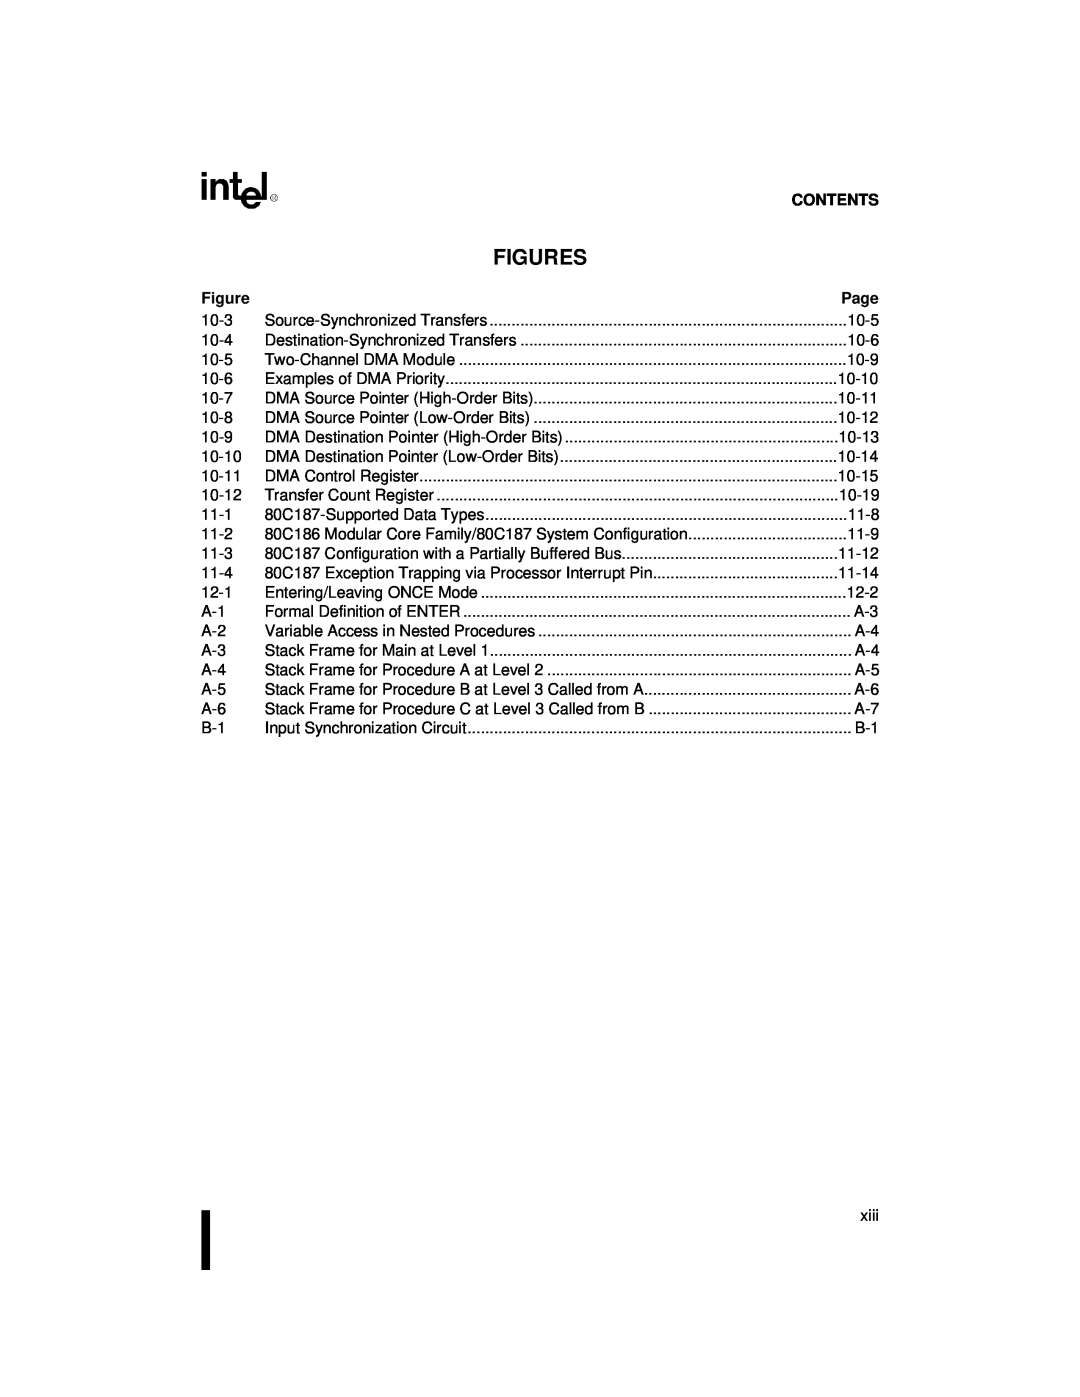 Intel 80C188XL, 80C186XL user manual Figures, Contents, Page, 10-3 